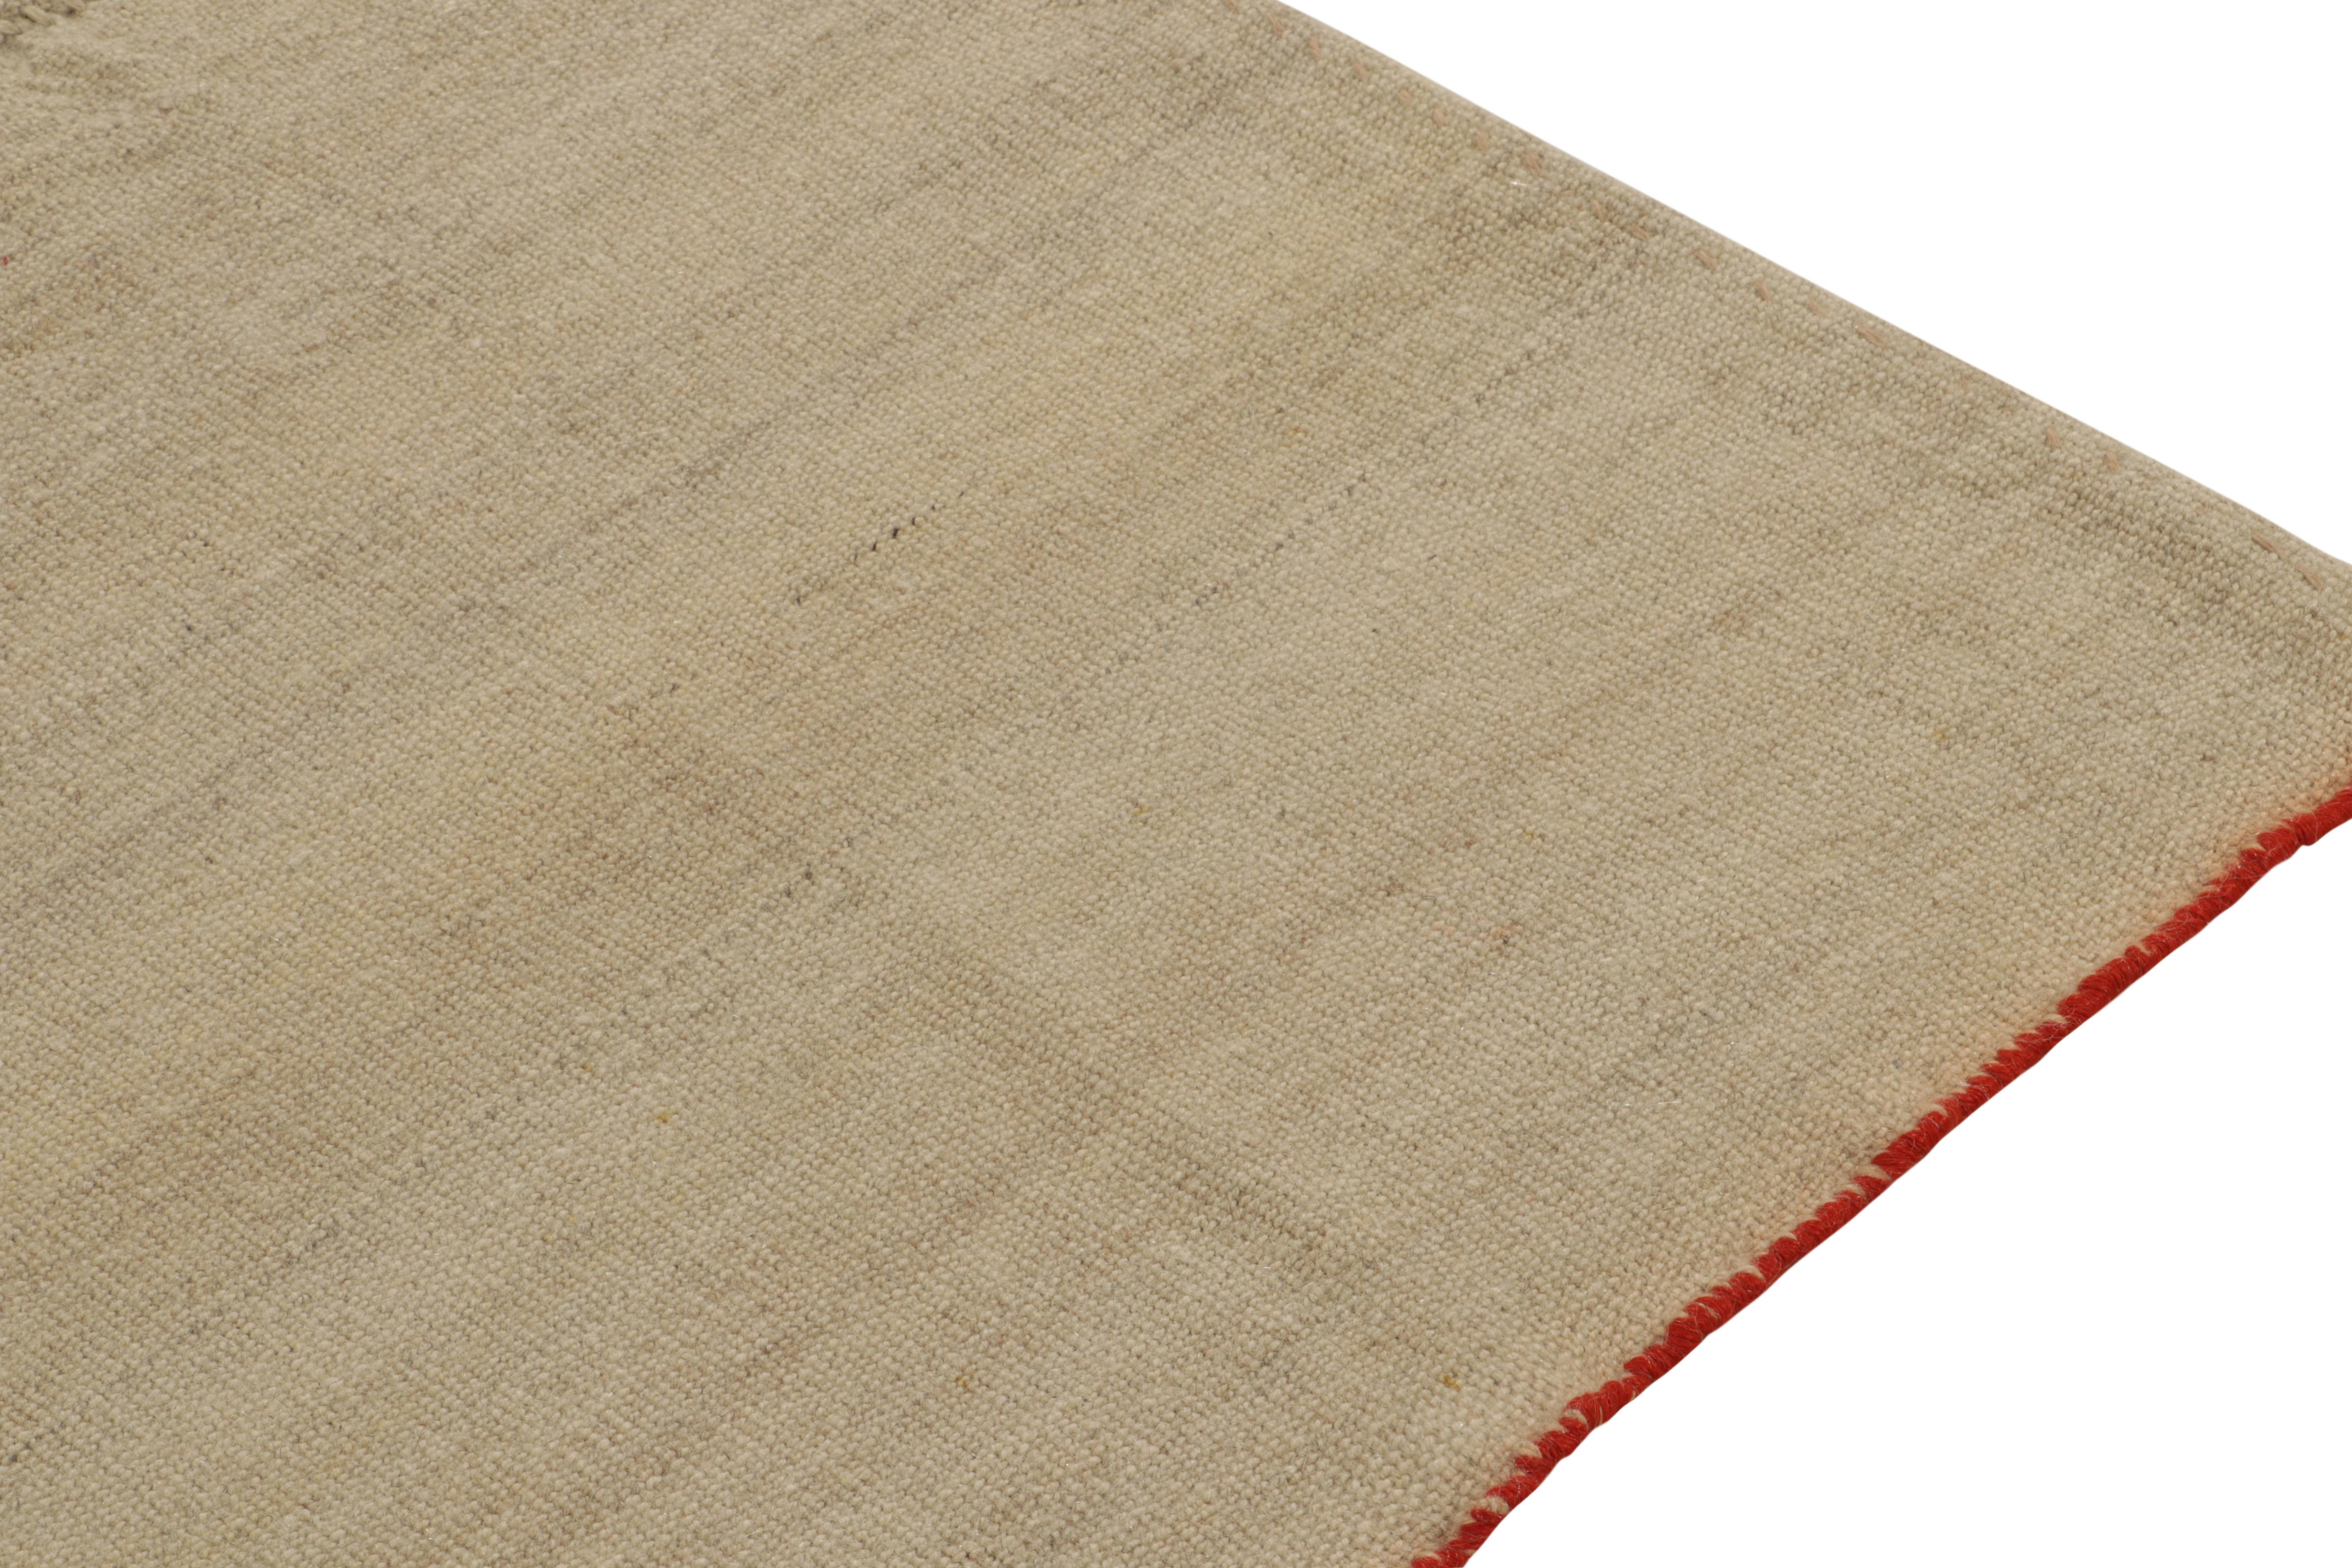 Vintage Plain Kilim in Beige-Brown Striations, Solid Hues by Rug & Kilim In Good Condition For Sale In Long Island City, NY